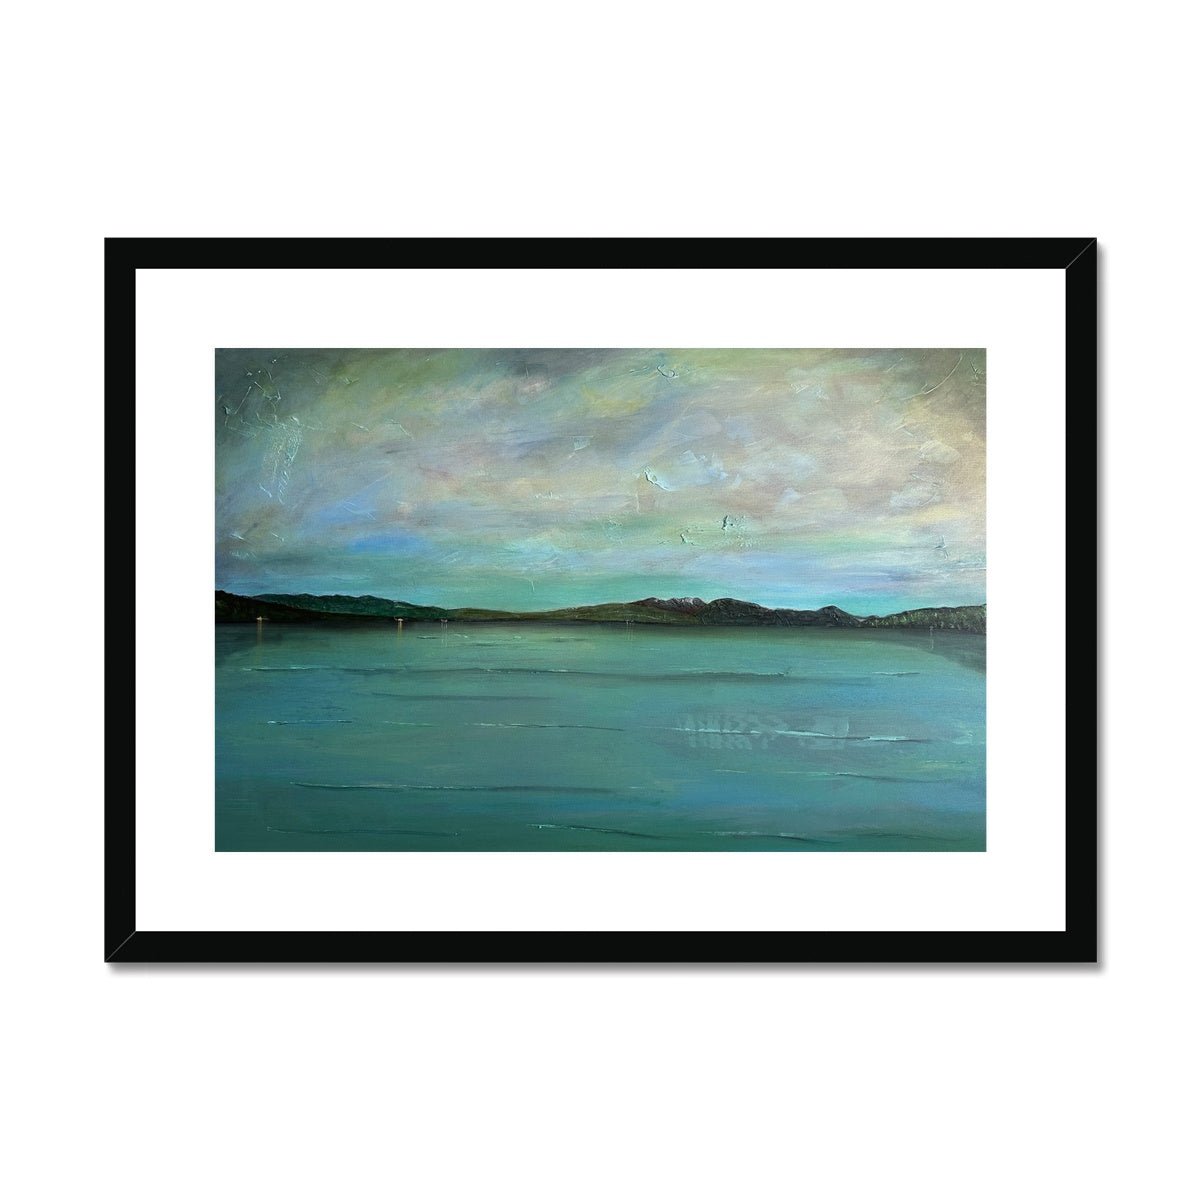 An Emerald Loch Lomond Painting | Framed & Mounted Prints From Scotland-Framed & Mounted Prints-Scottish Lochs & Mountains Art Gallery-A2 Landscape-Black Frame-Paintings, Prints, Homeware, Art Gifts From Scotland By Scottish Artist Kevin Hunter